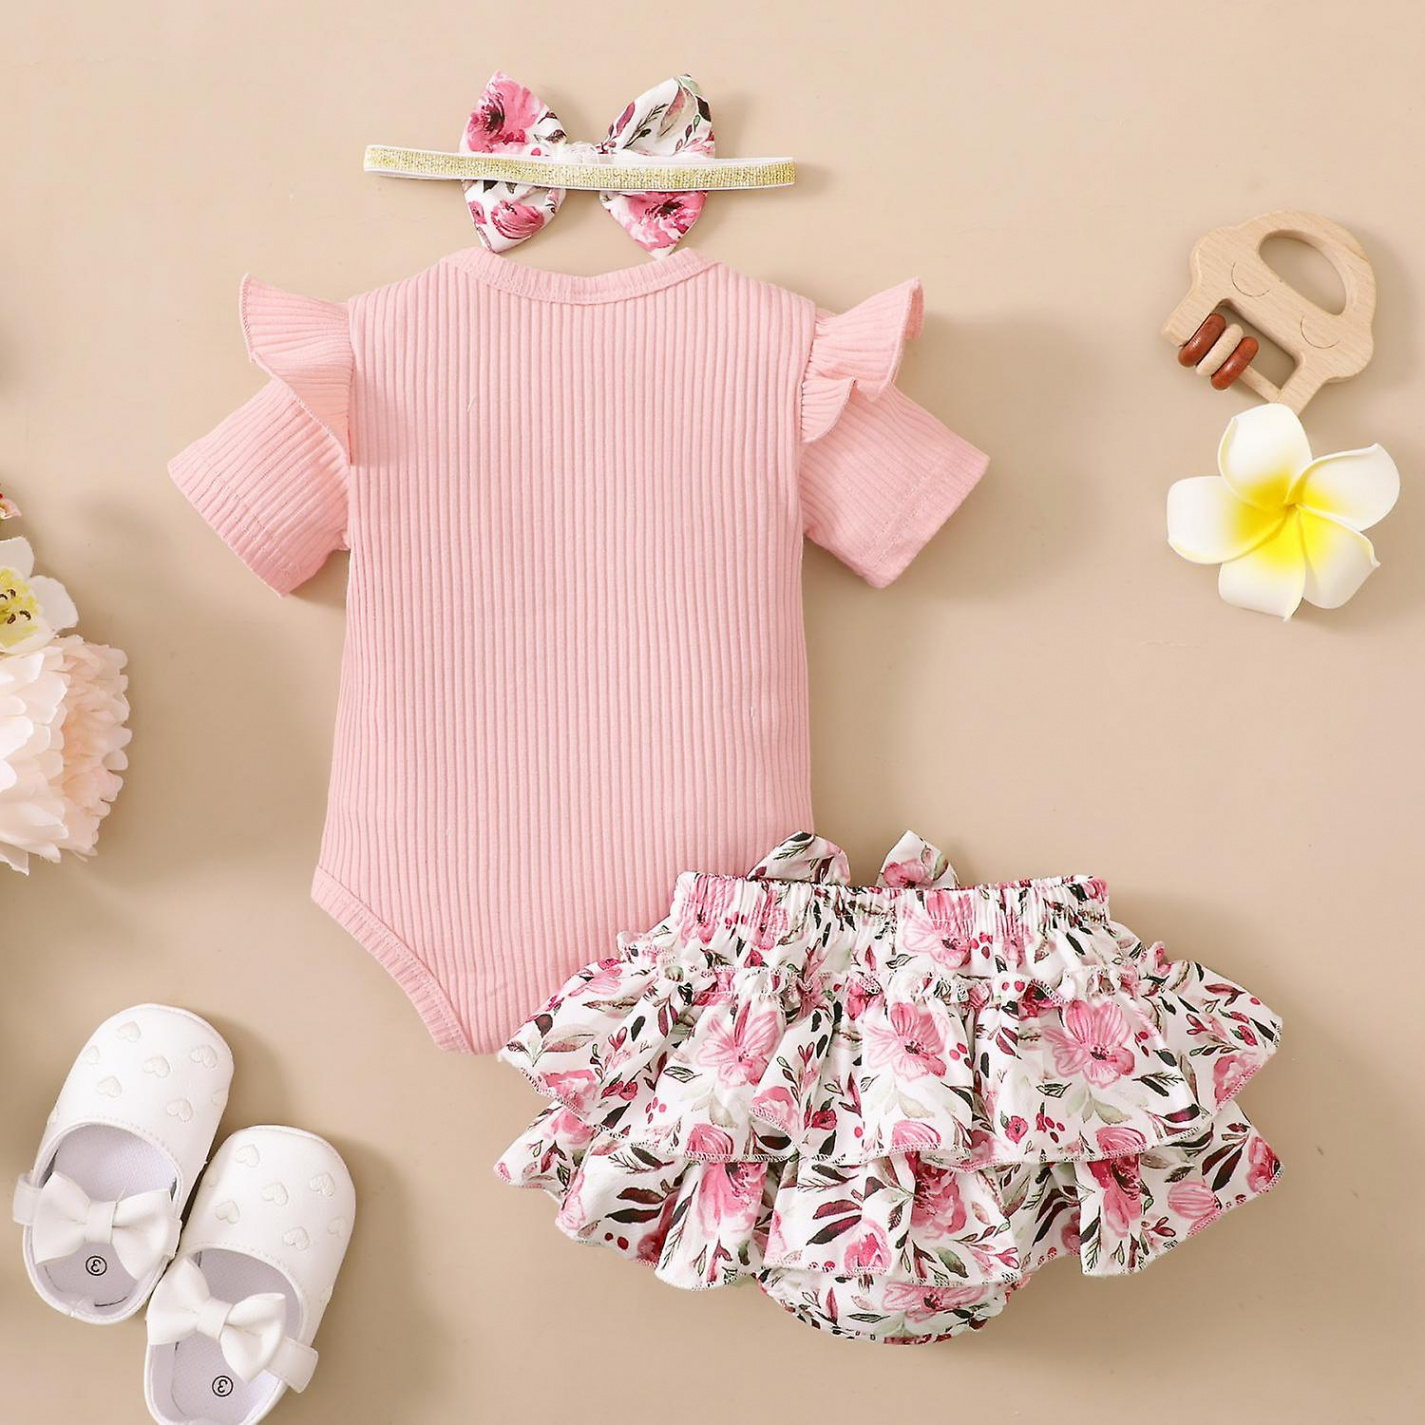 Newborn Baby Girl Clothes Romper Shorts Set Floral Summer Outfits